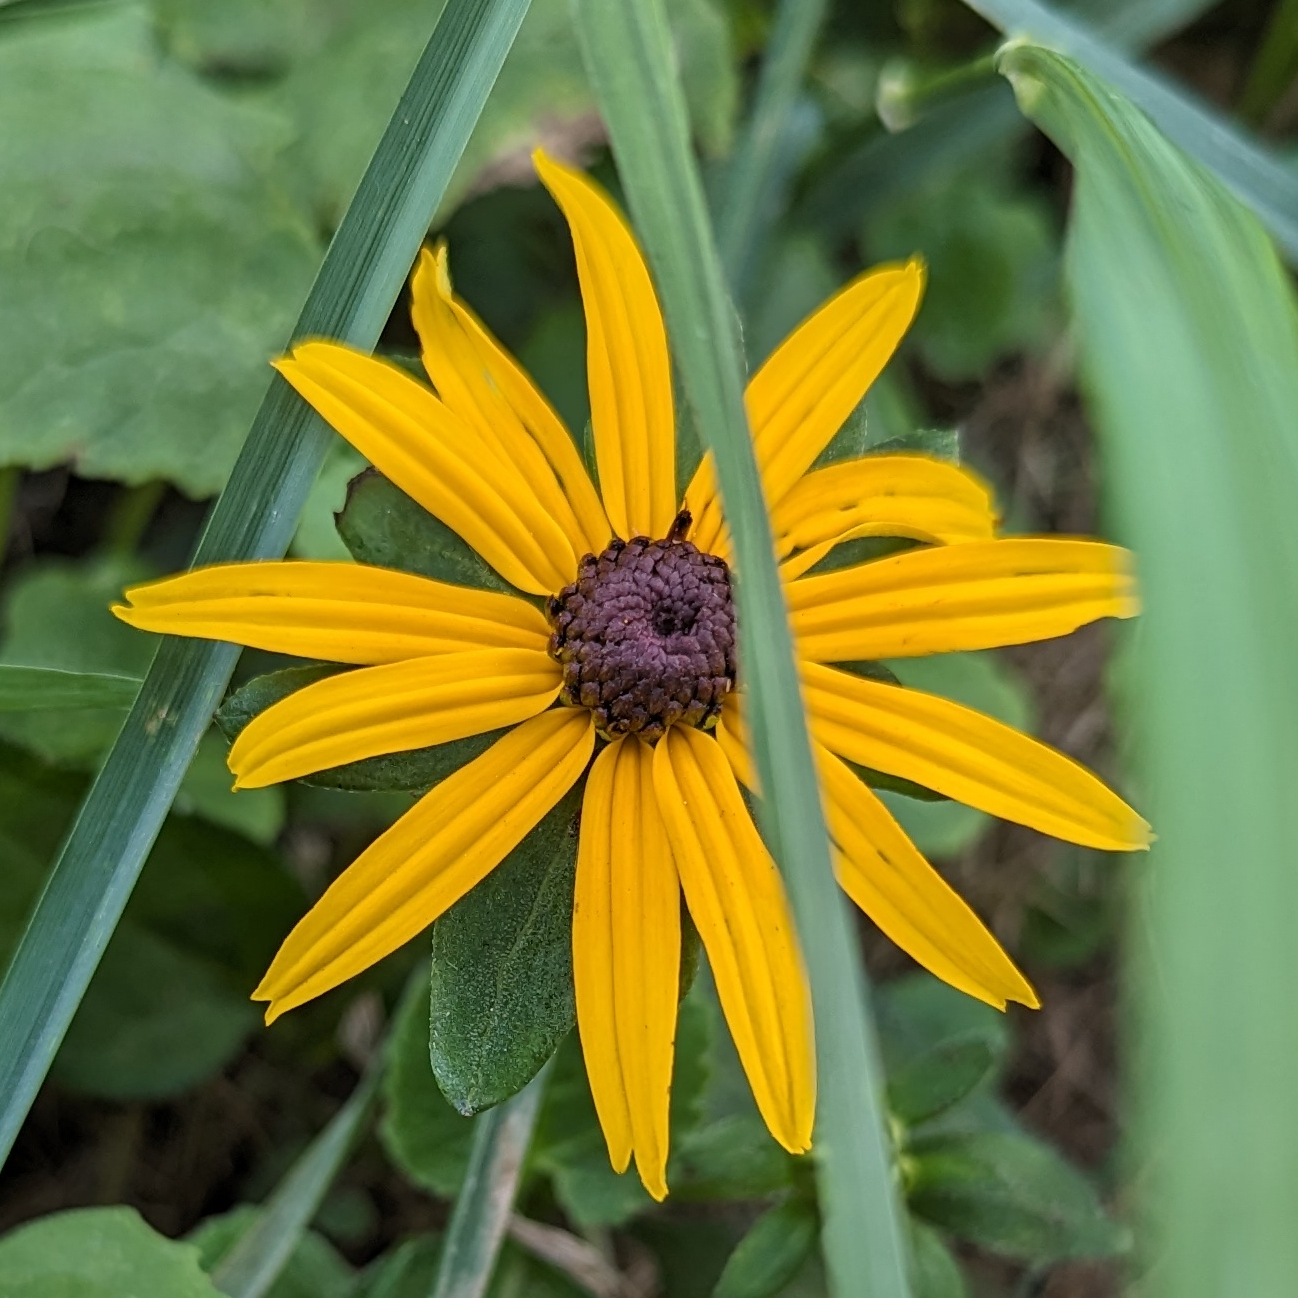 An image of a single yellow flower, looking sharp in the foreground, surrounded by the blurry forms of green leaves and blades of grass.